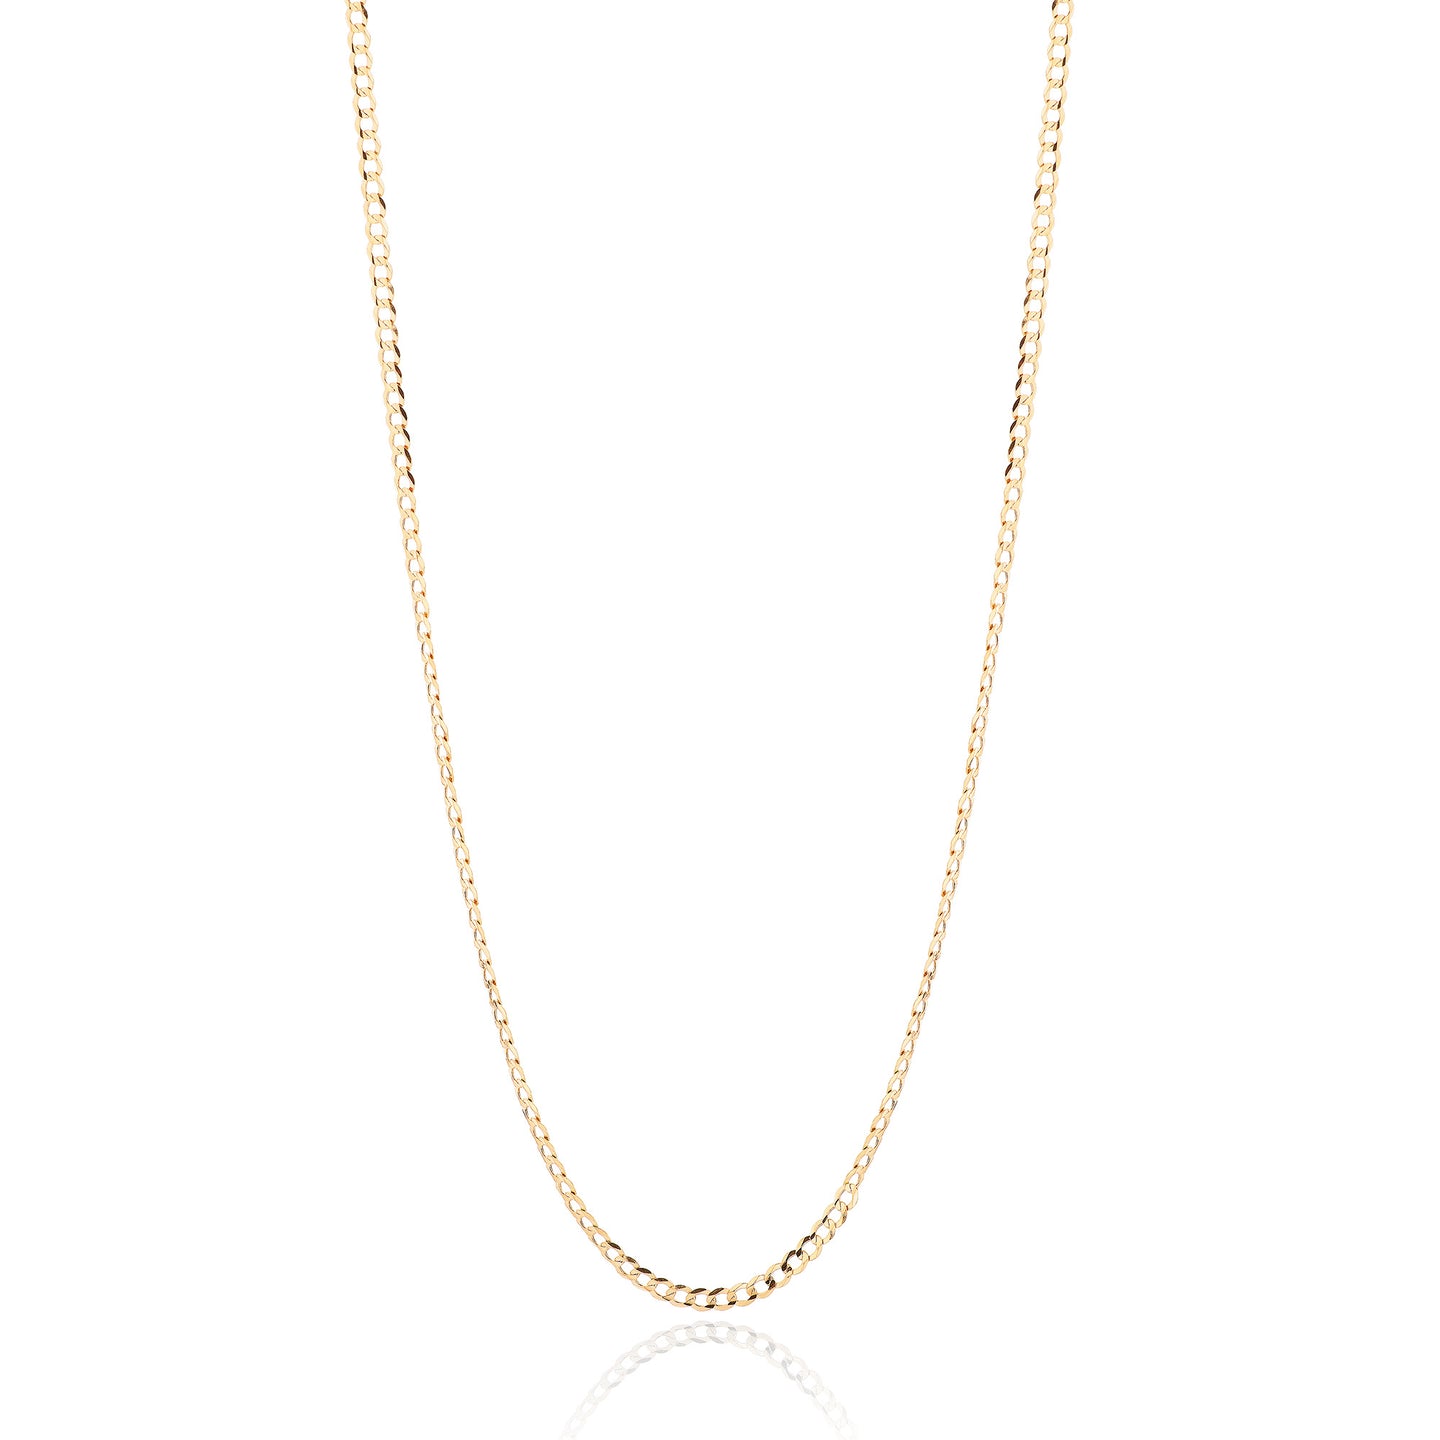 Gold Mini Curb Link Chain Necklace